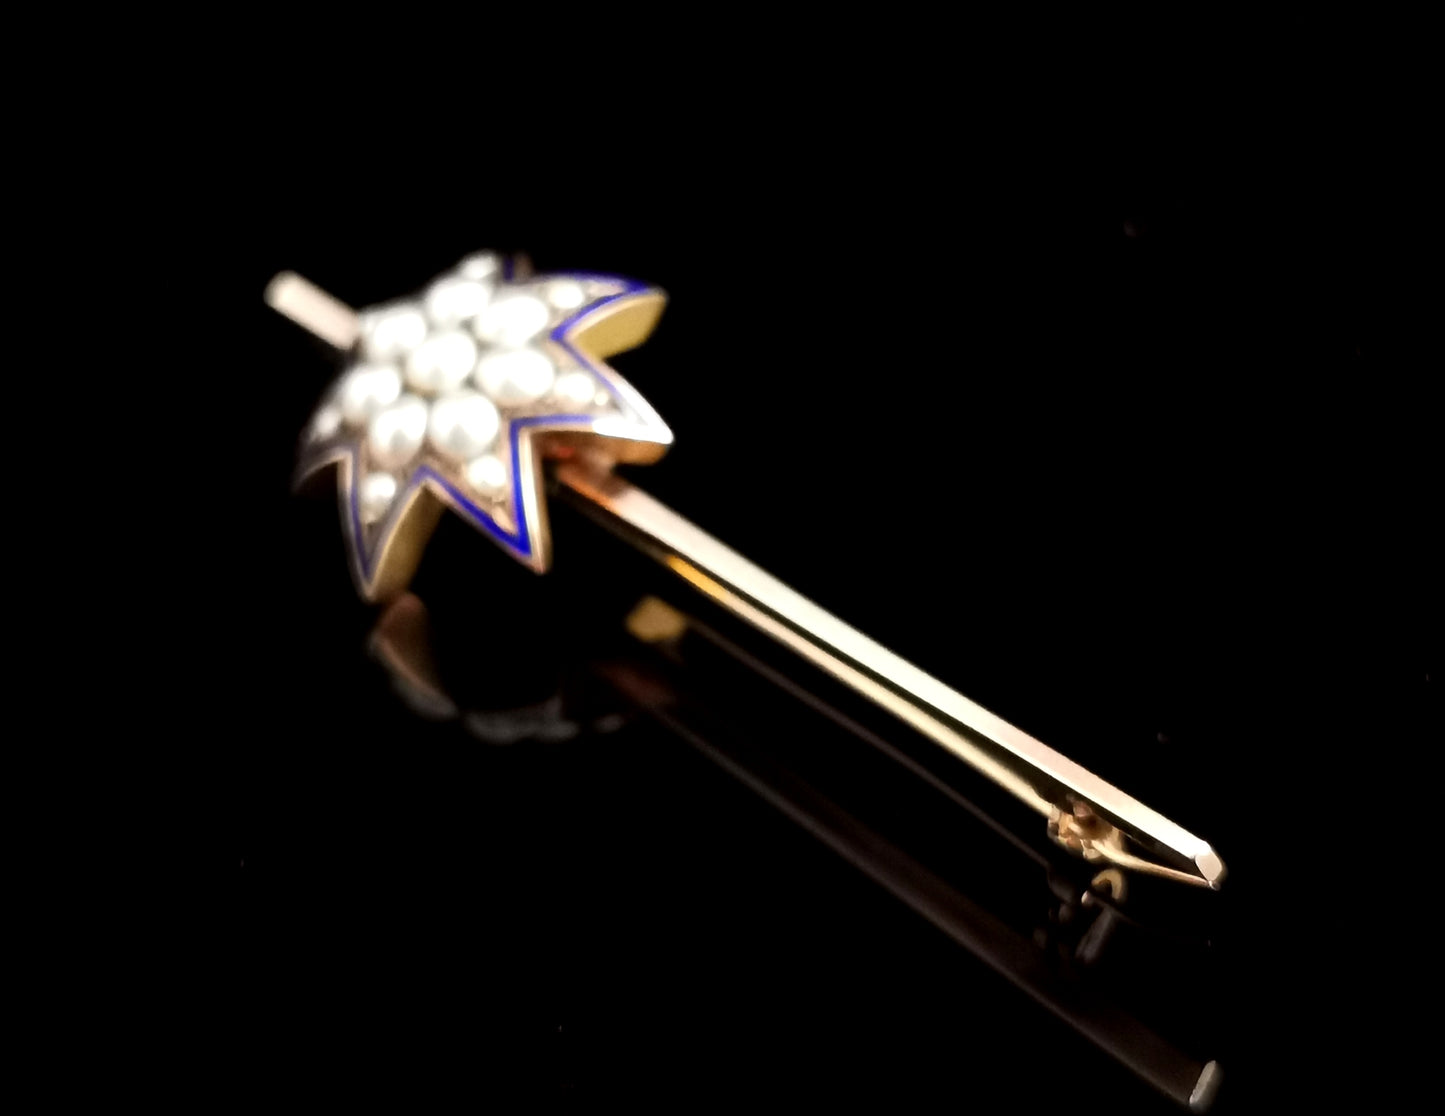 Antique Star brooch, pearl and blue enamel, 9ct gold